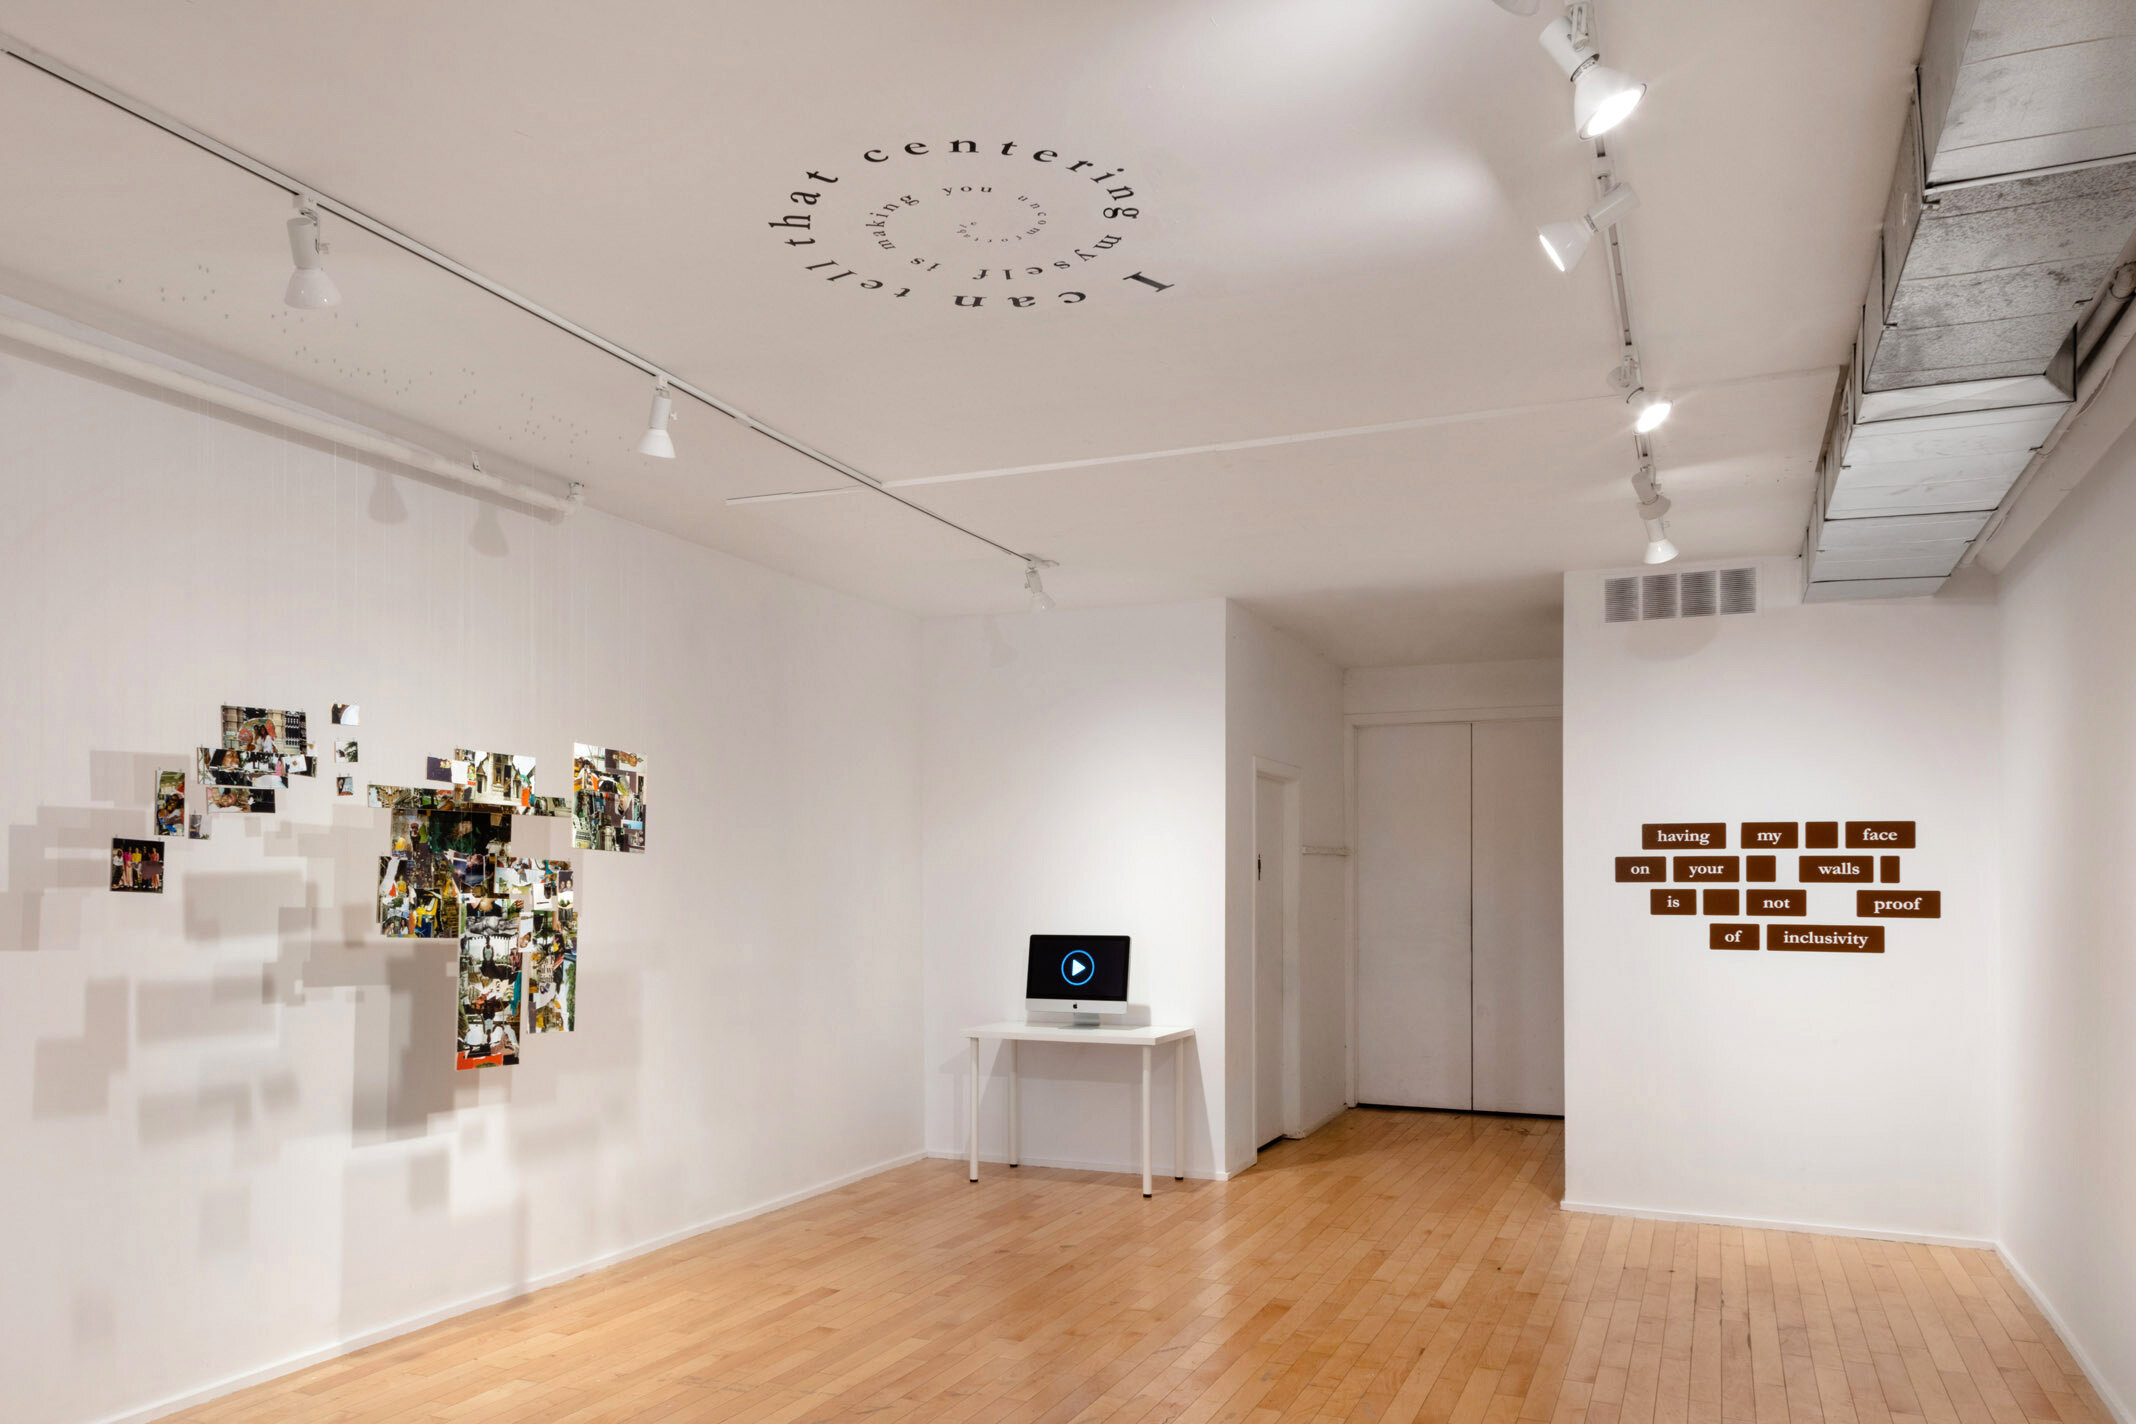  Installation View from  Reading Silences  at Forest City Gallery. London, Ontario. Curated by Matthew Kyba. 